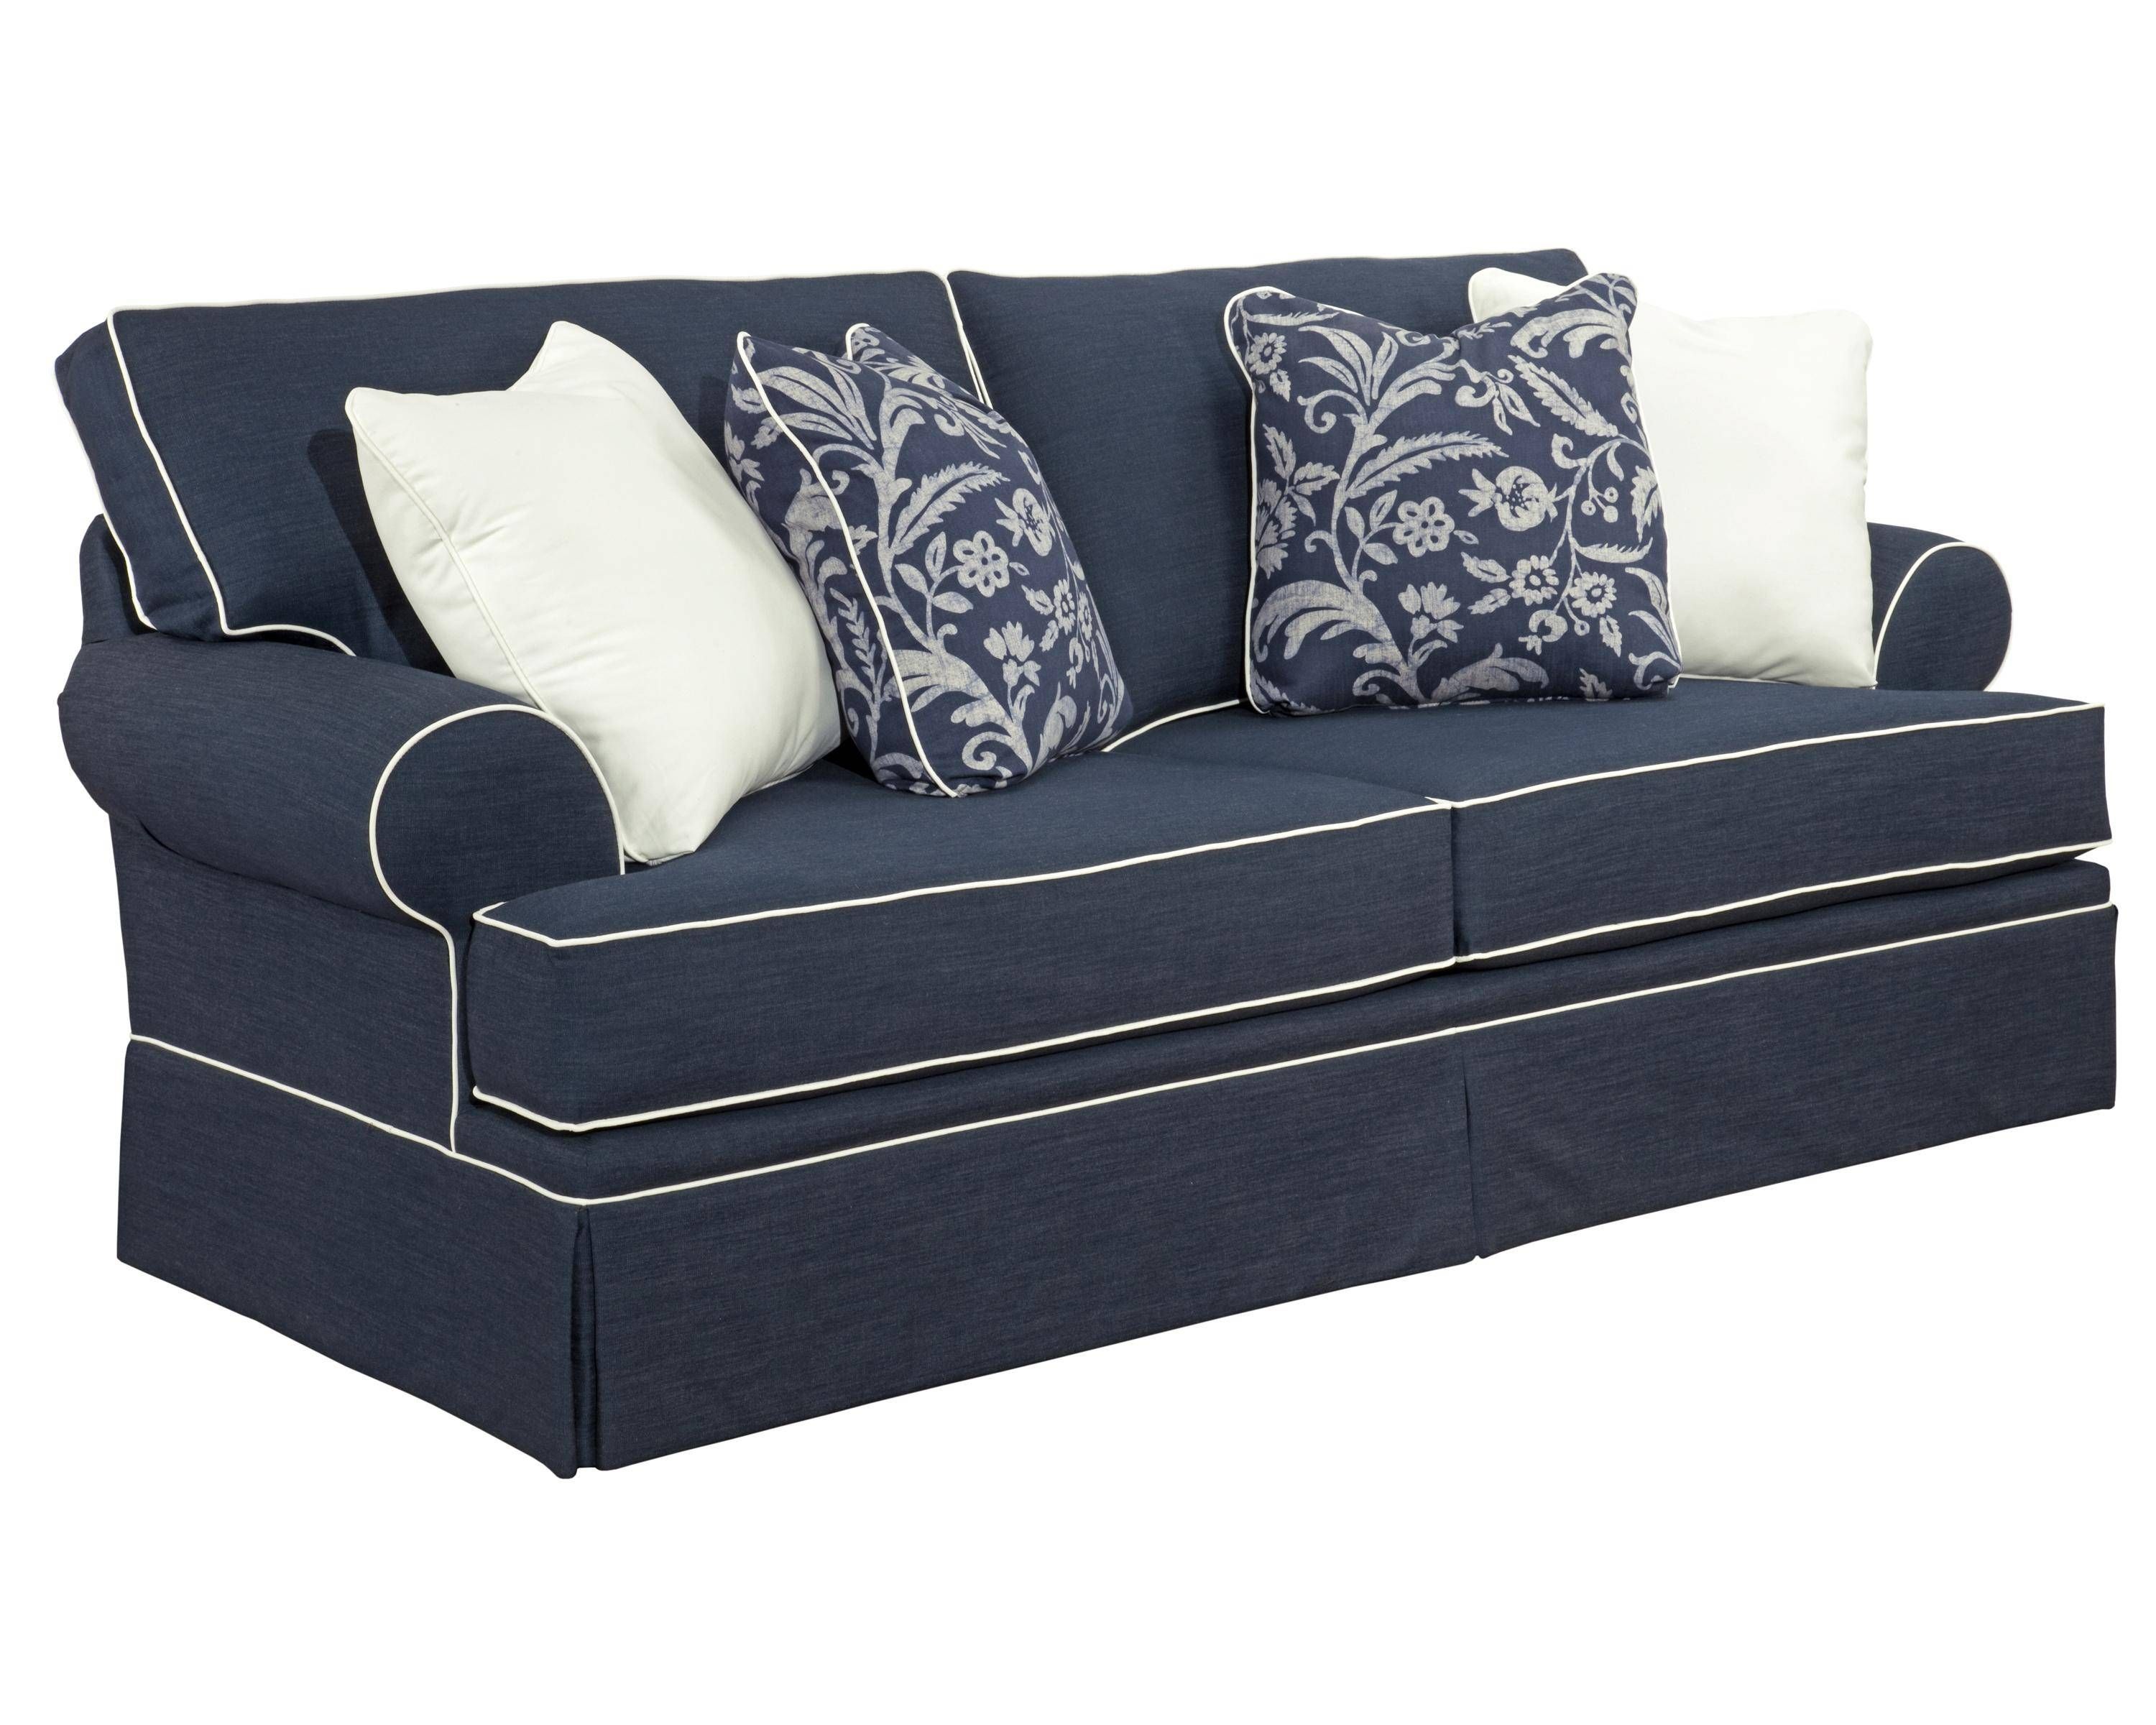 Broyhill Furniture Emily Casual Style Sofa With Rolled Arms And Throughout Broyhill Emily Sofas (View 5 of 15)